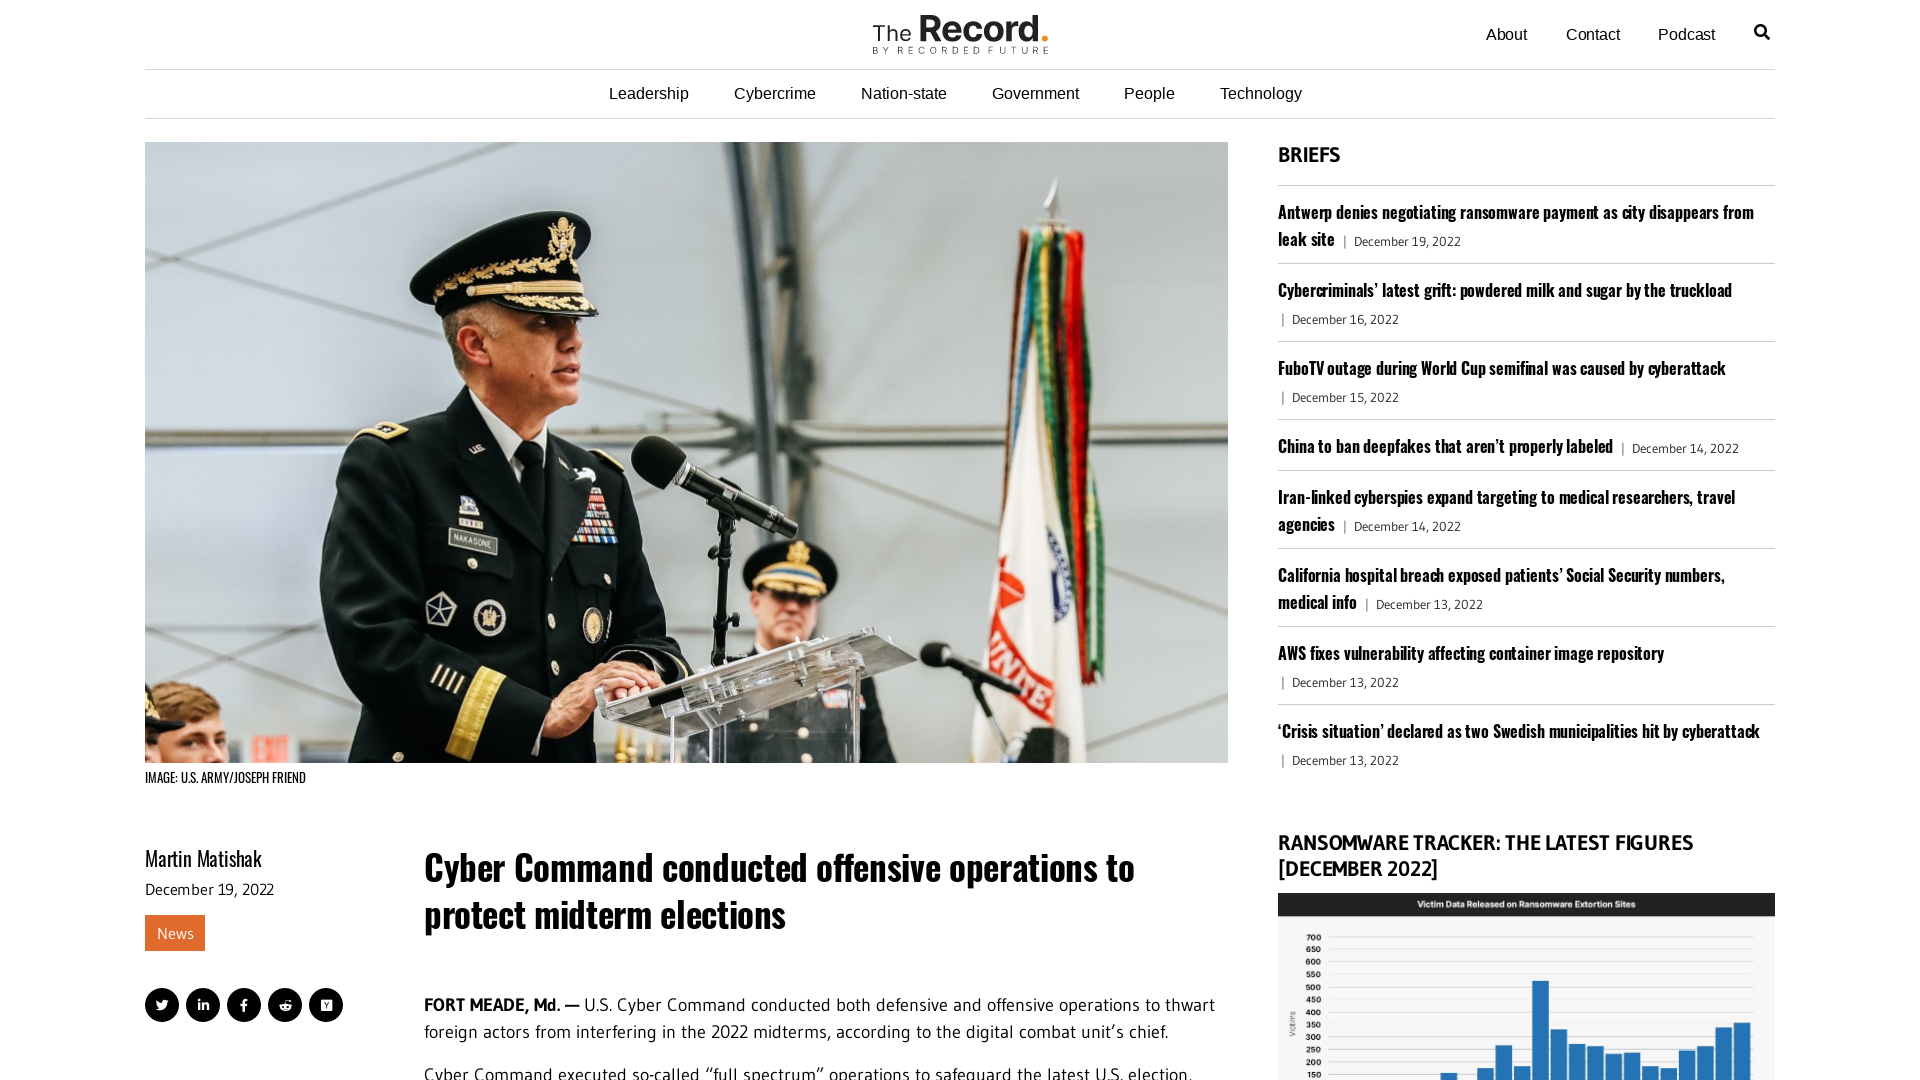 Cyber Command conducted offensive operations to protect midterm elections - The Record by Recorded Future